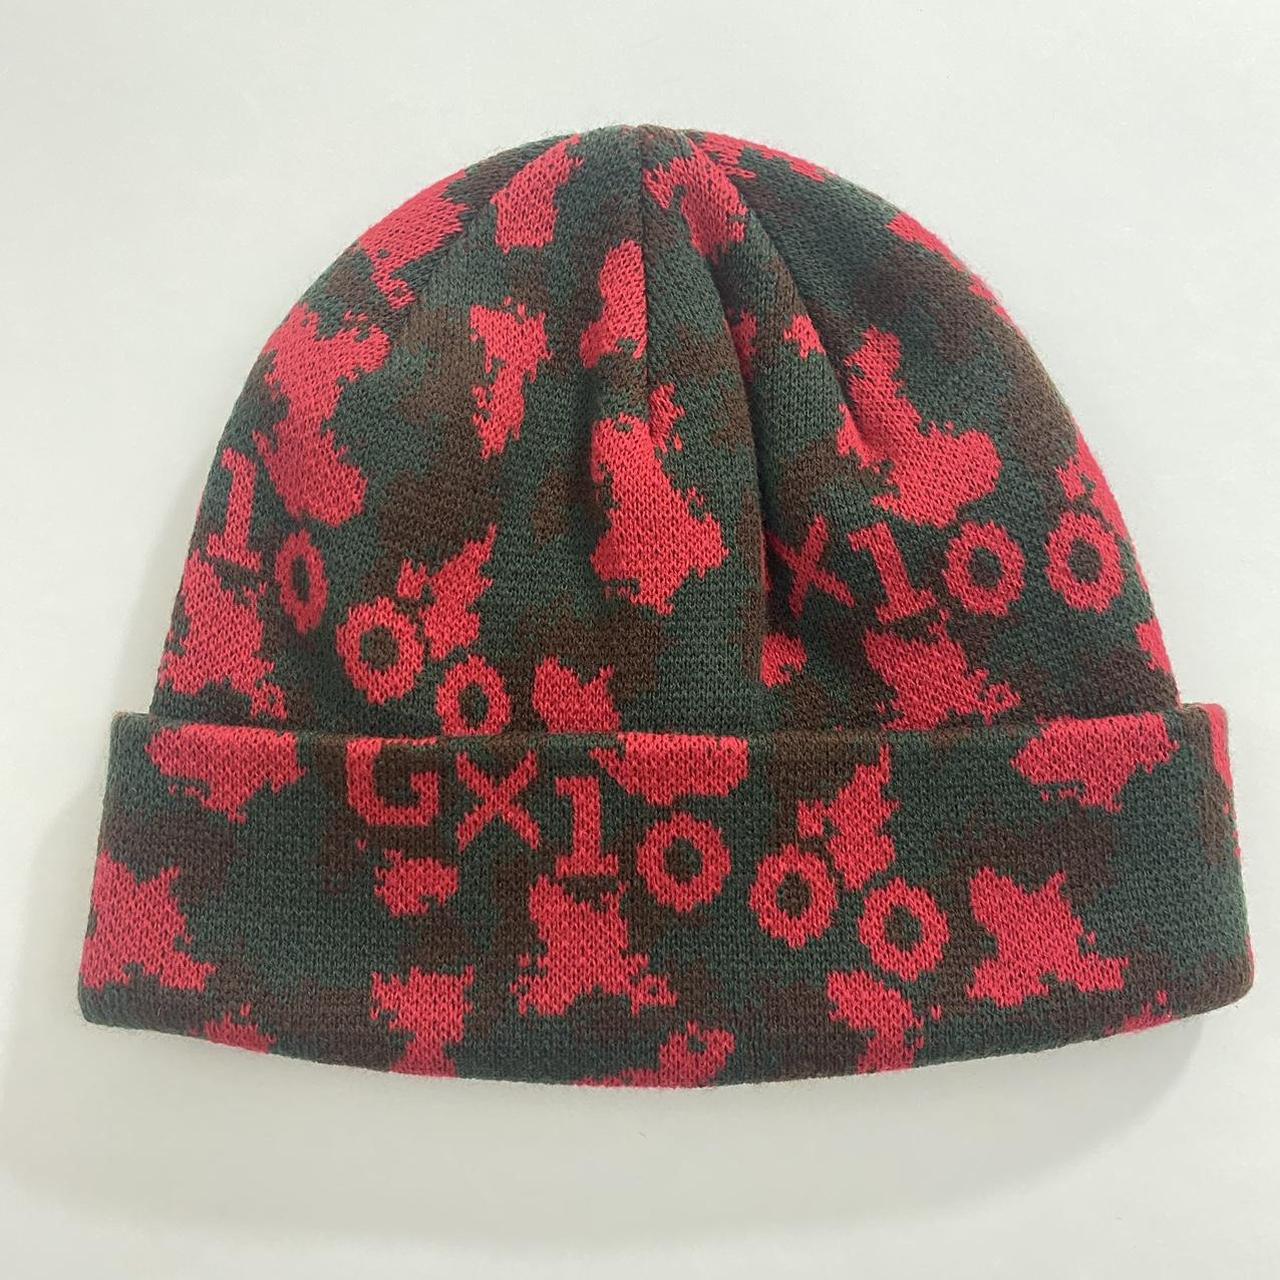 GX1000 Trenched Camo Beanie In Red and Green. One... - Depop